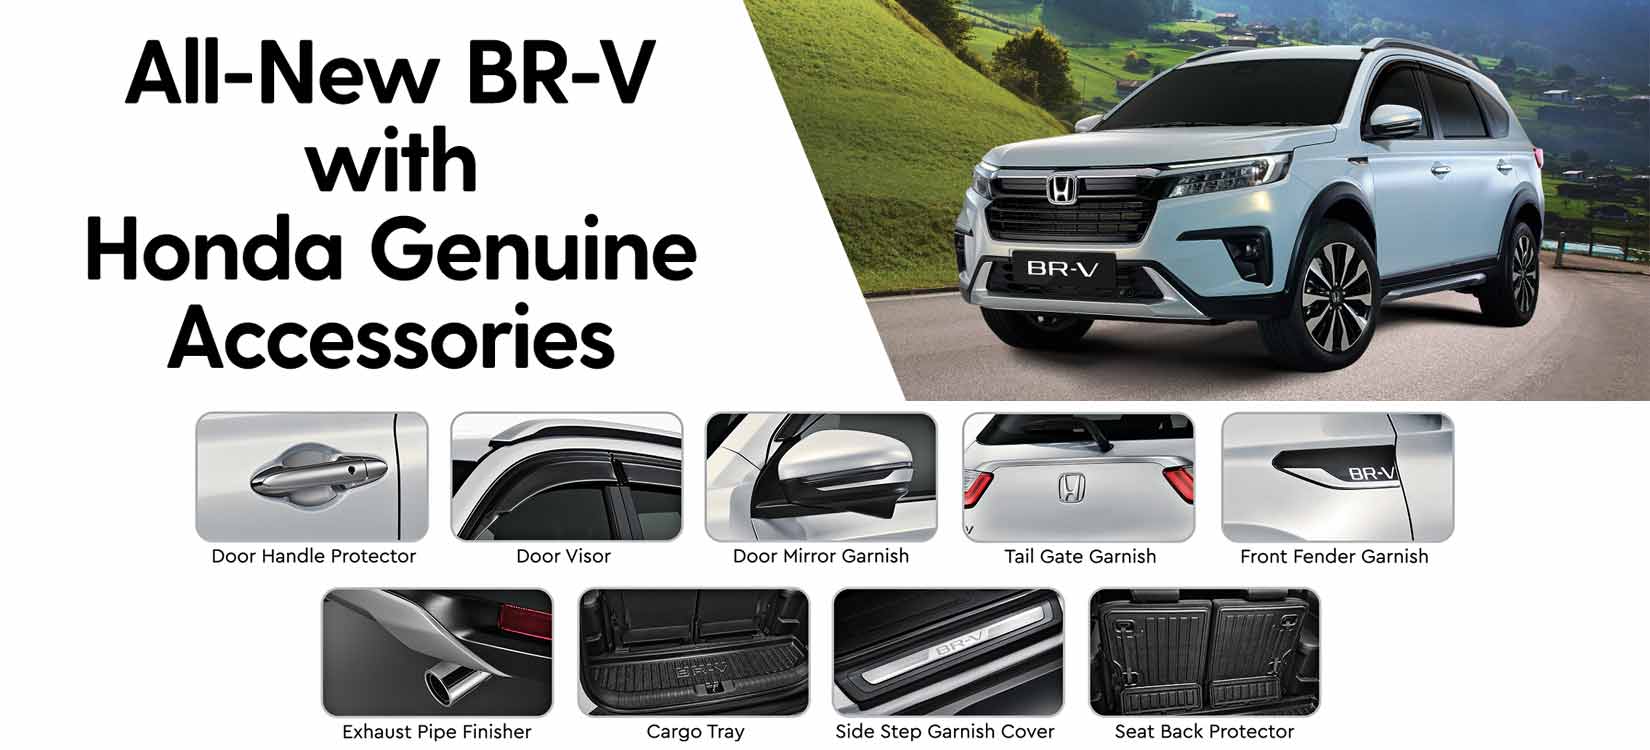 Spruce up your All-New BR-V with Honda Genuine Accessories